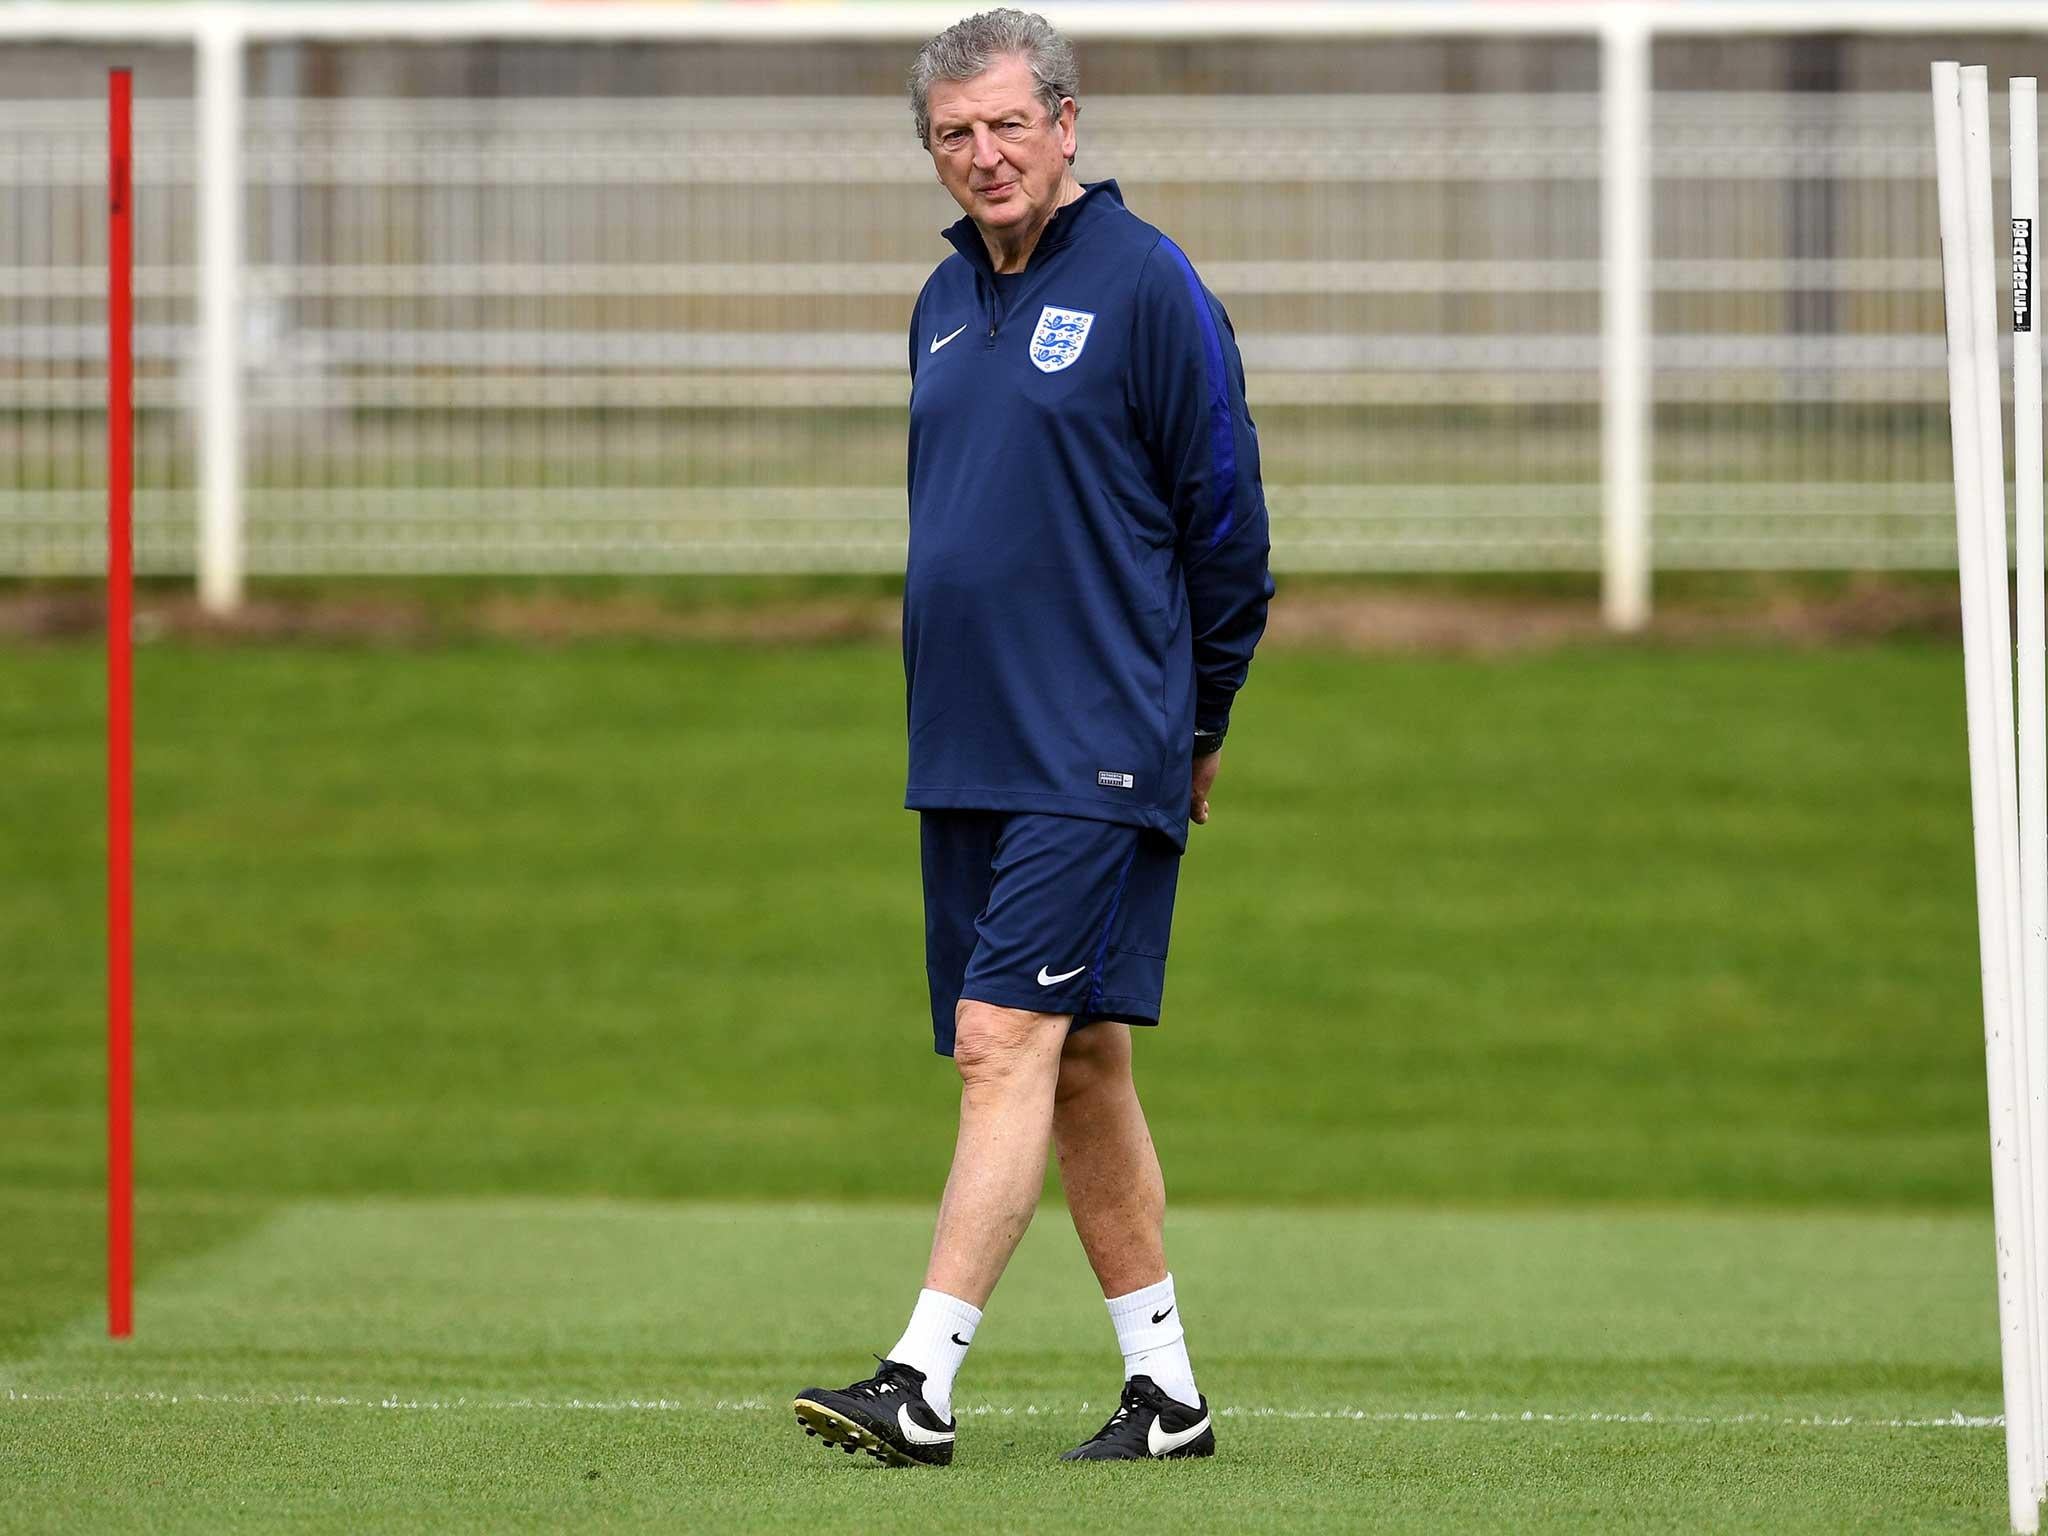 Roy Hodgson knows the pressure is on after two limp previous tournaments under his management